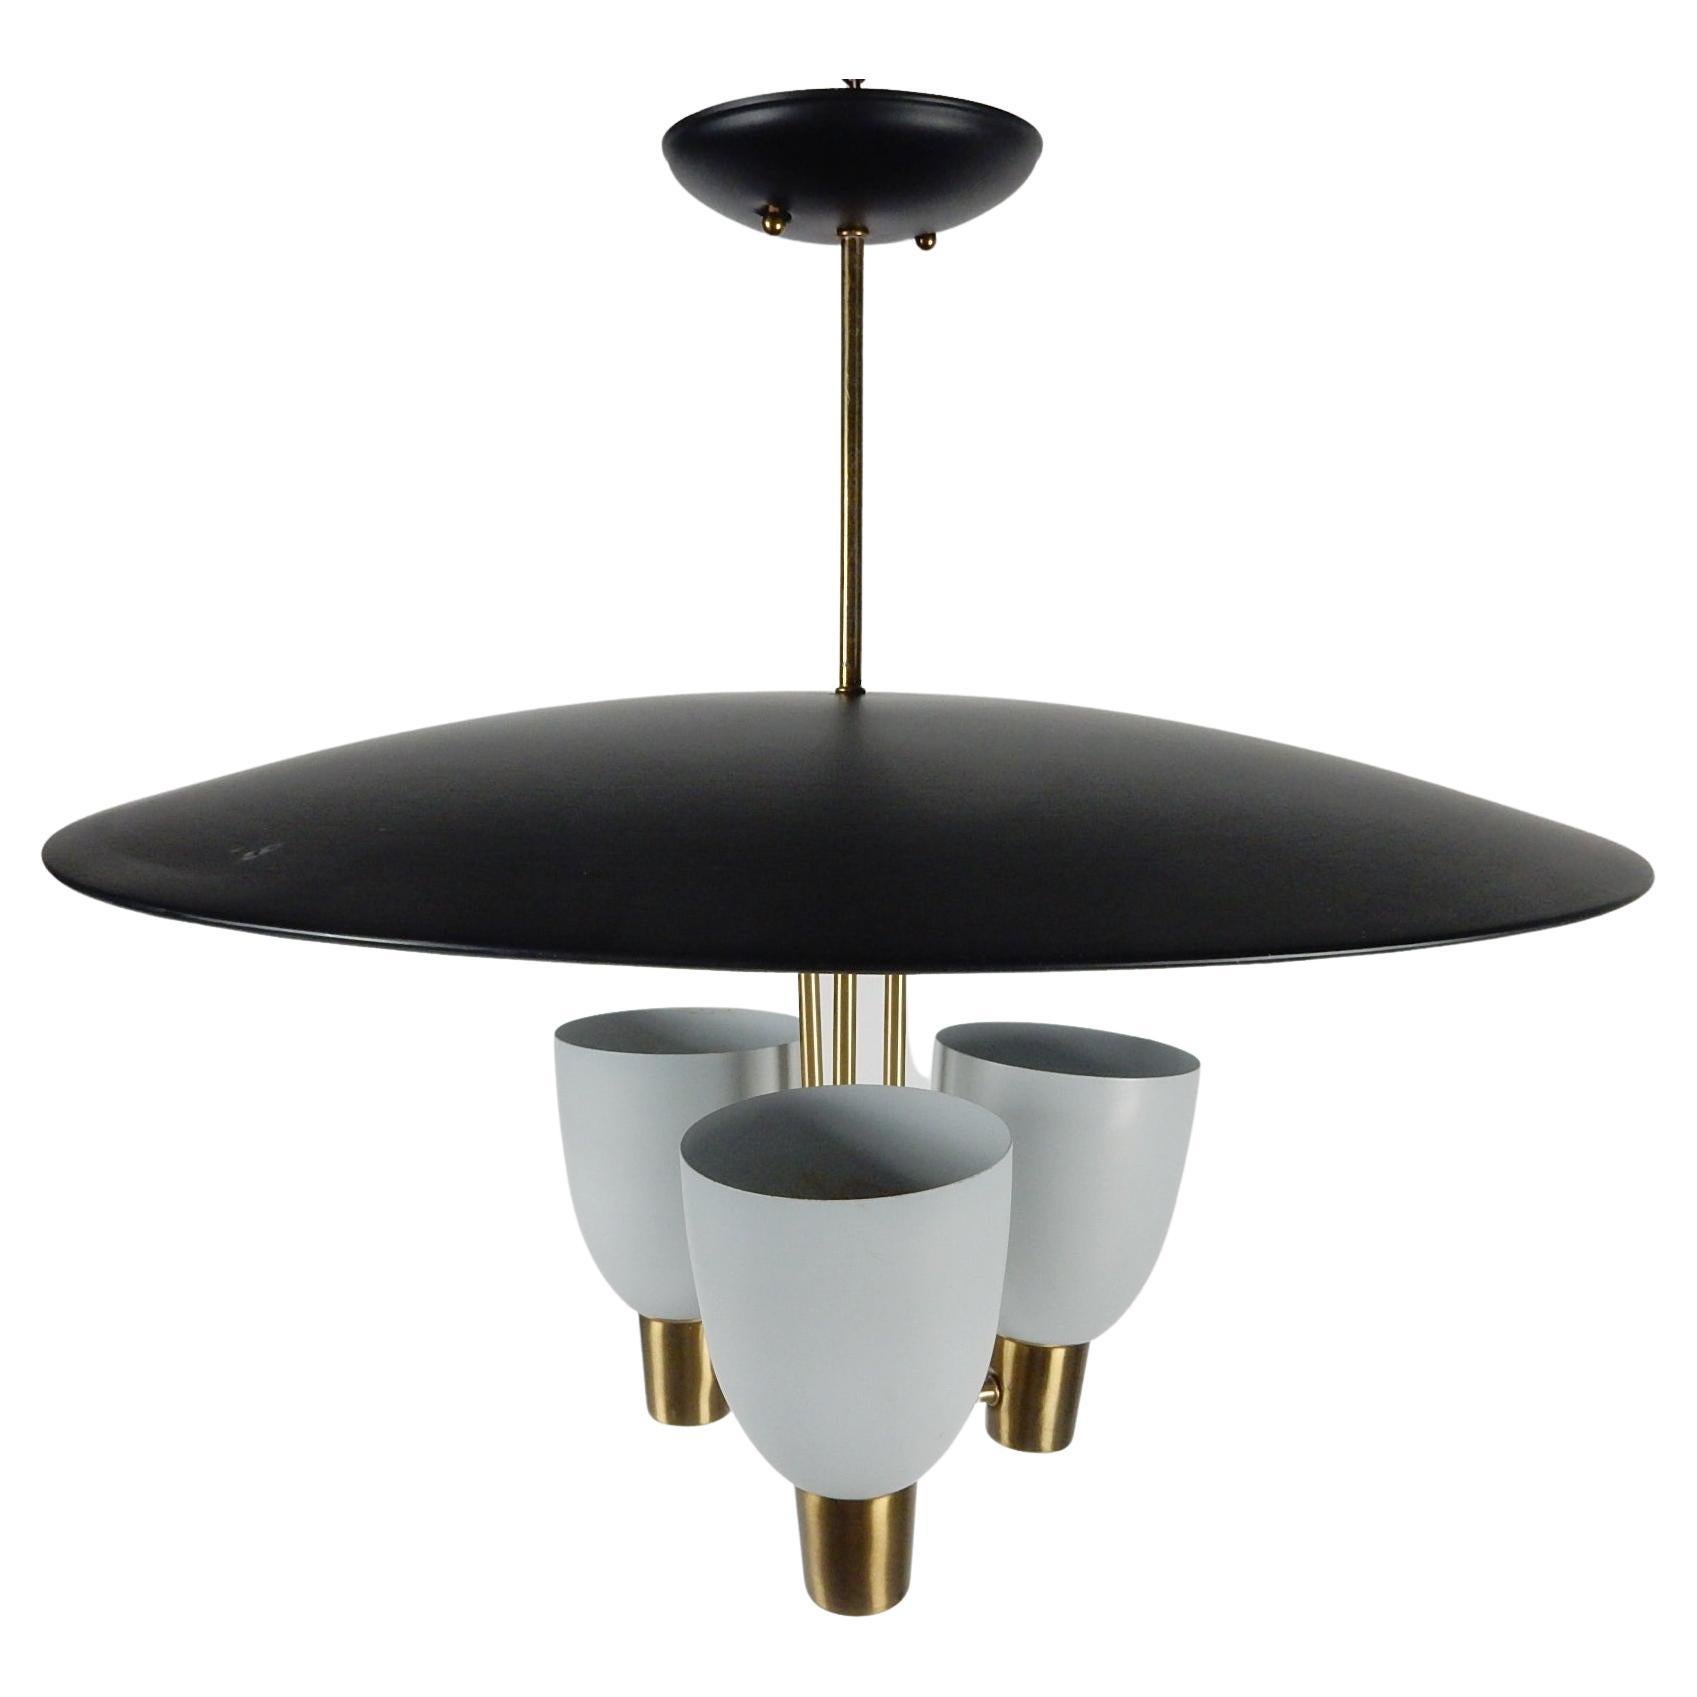 1950's Mid-century UFO saucer diffuser chandelier by Moe Lighting.
Original matte black and putty color enamel with brass plated arms and drop pipe.
Exceptional original condition having hung in the same location since 1953.
Rewired and ready to